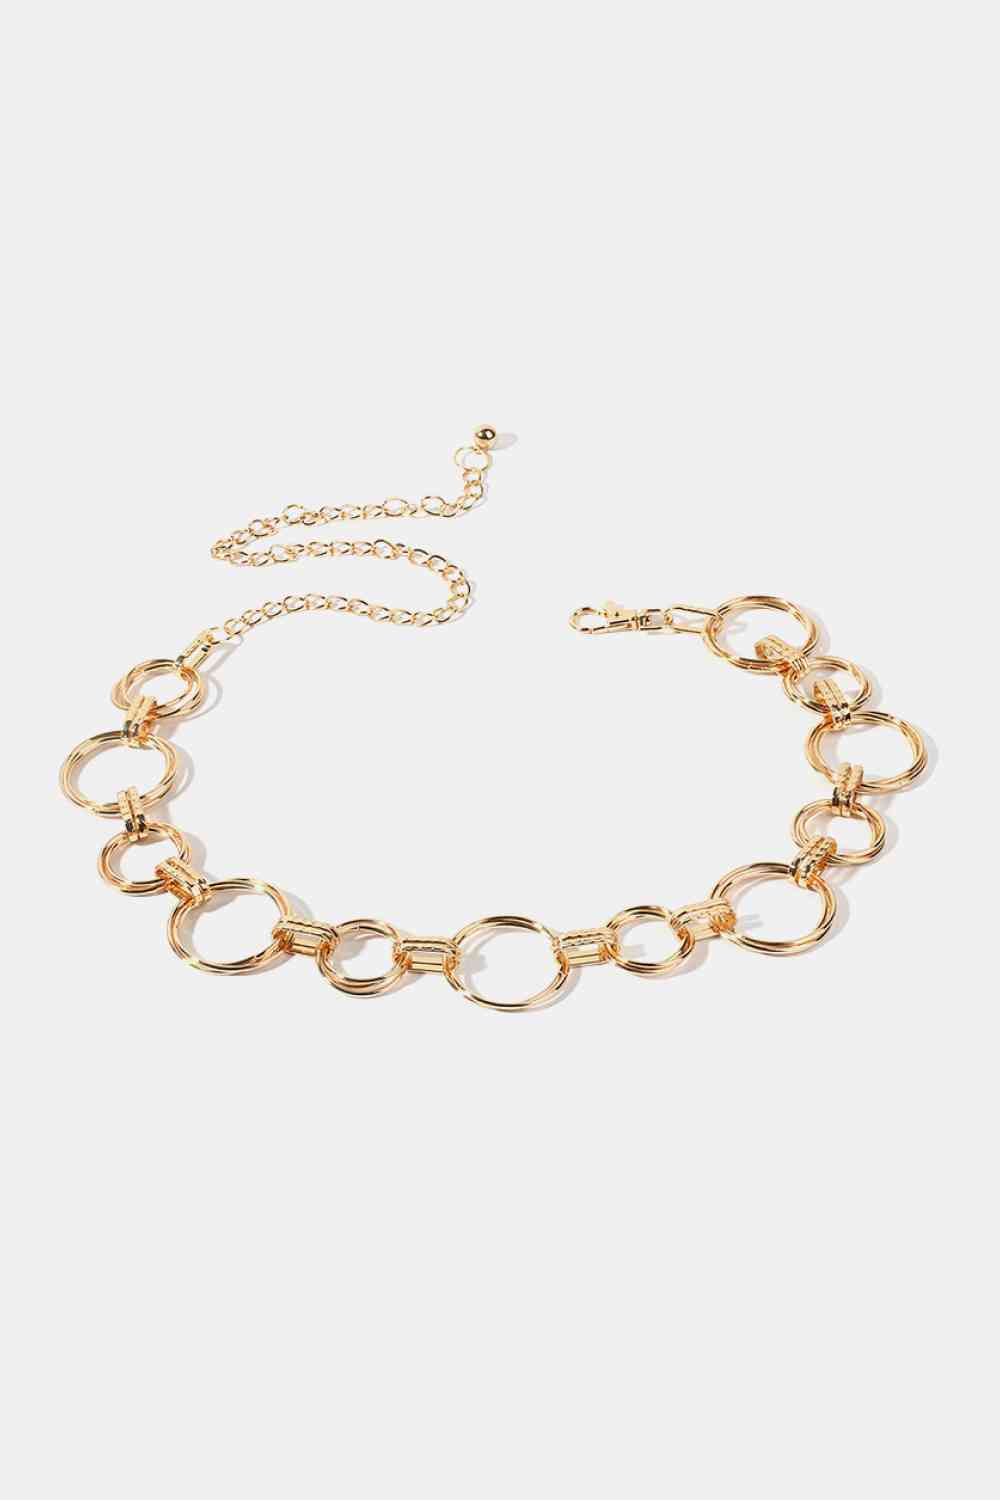 Alloy Chain Circle Shape Belt Gold One Size